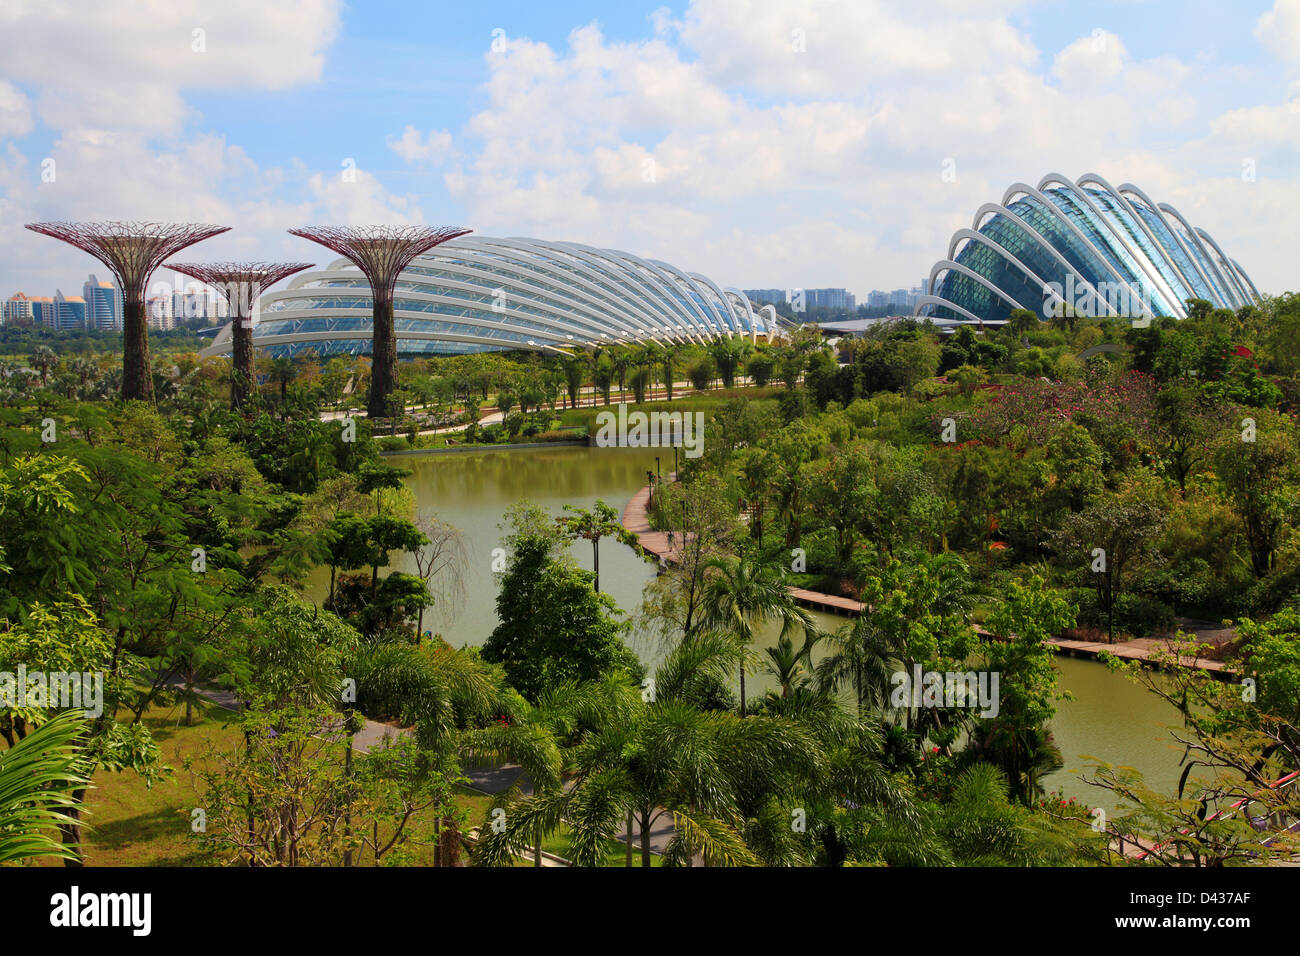 Singapore, Gardens by the Bay, Stock Photo